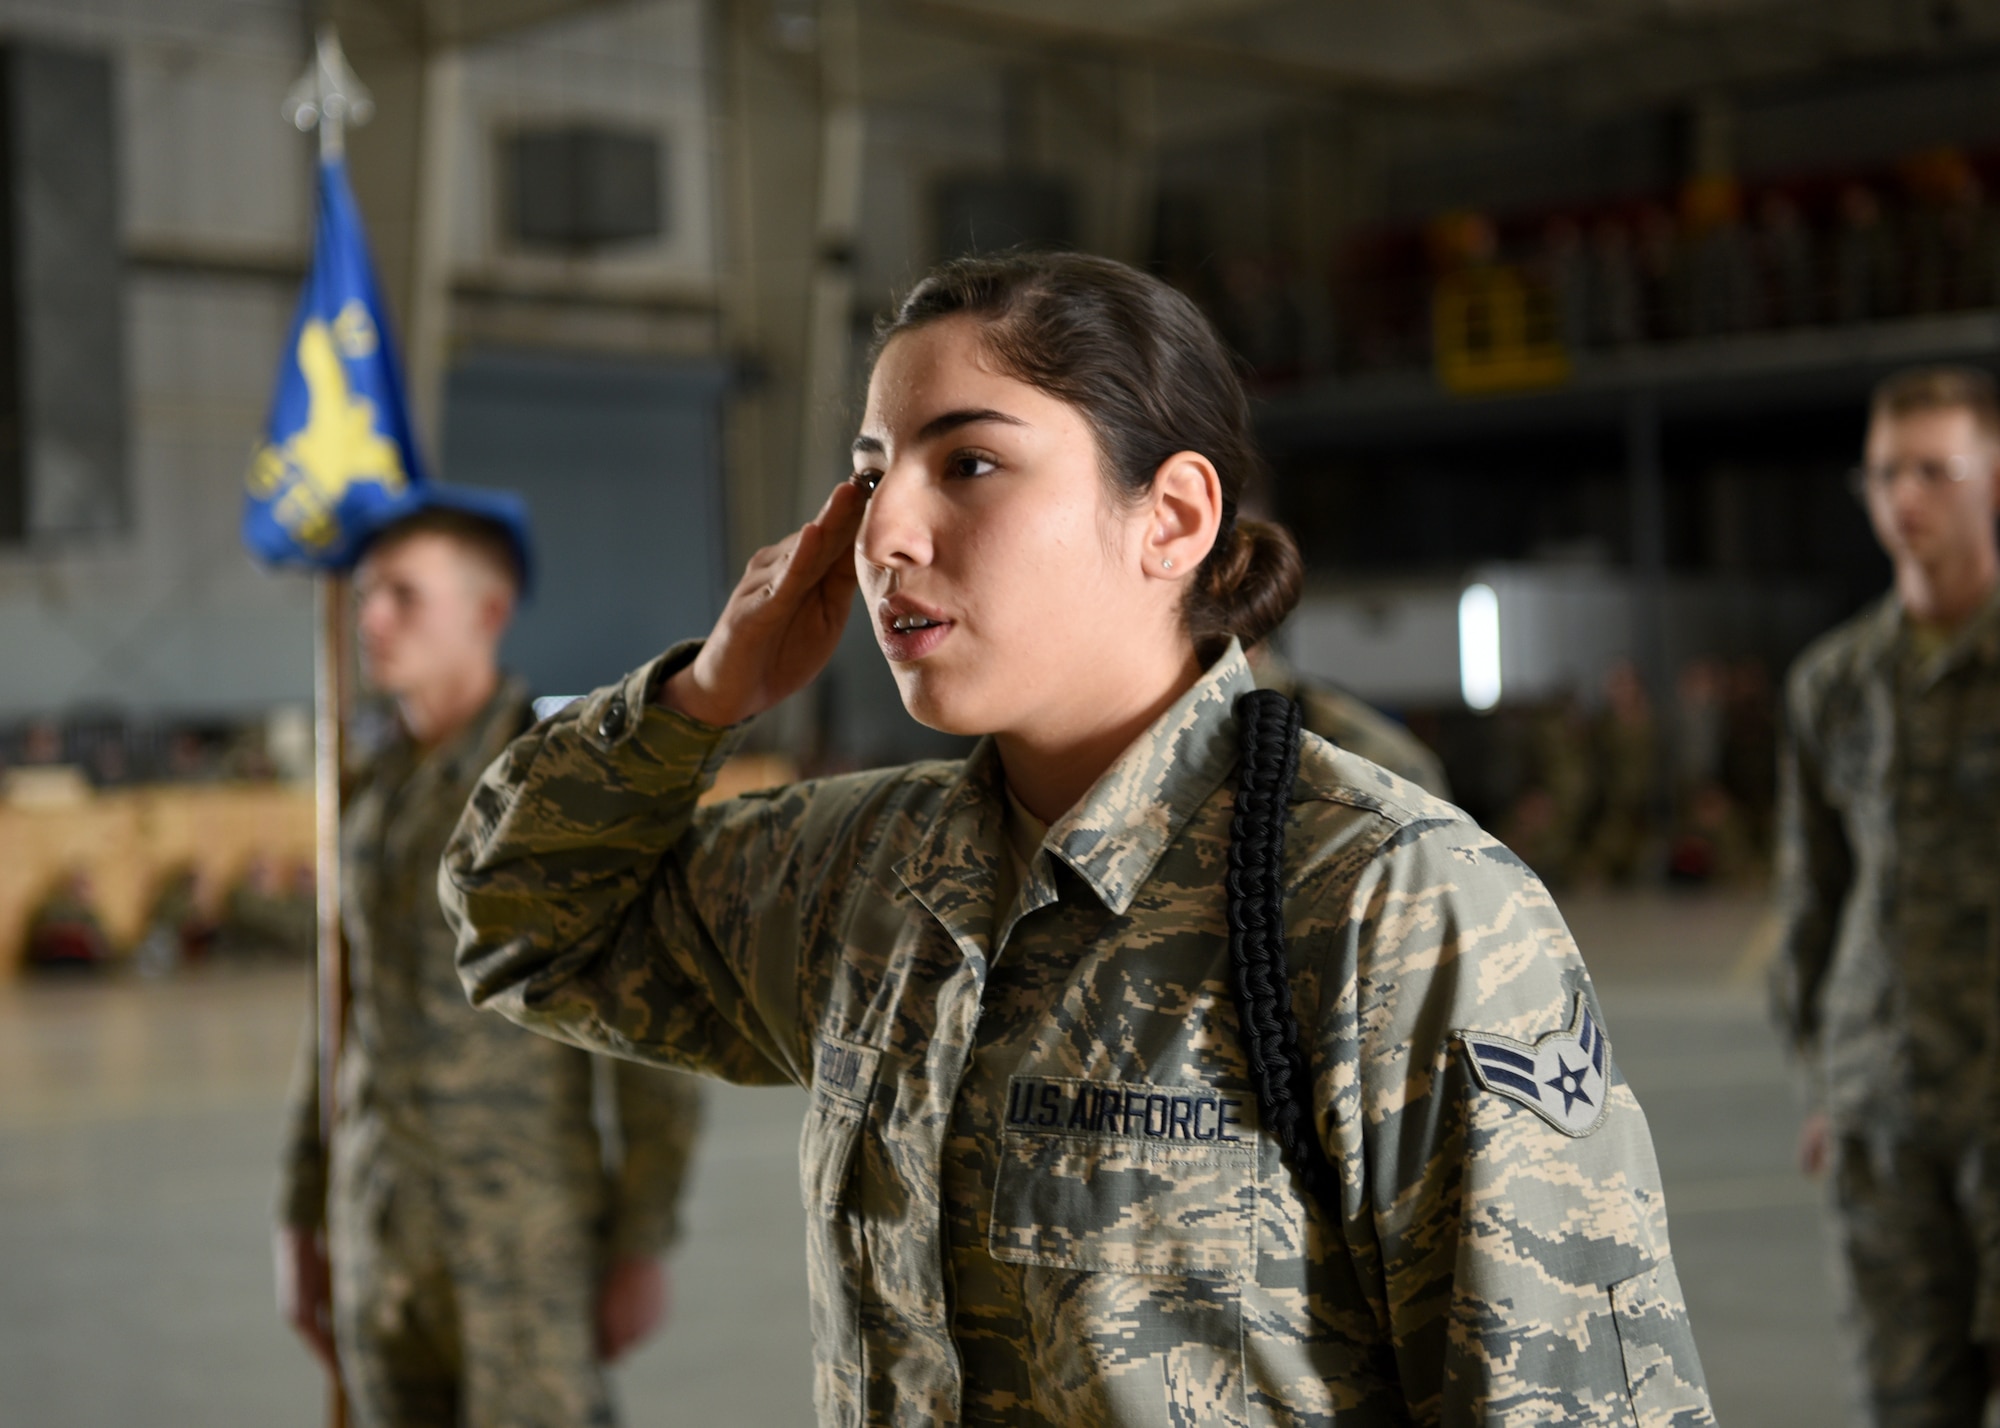 U.S. Air Force Airman 1st Class Walker Arroquin, 315th Training Squadron student, report salutes before commanding her flight at the 17th Training Group Drill Competition inside the Louis F. Garland Department of Defense Fire Academy High Bay on Goodfellow Air Force Base, Texas, Feb. 7, 2020. As the person in charge, Arroquin formally reports for the whole formation prior to competing. (U.S. Air Force photo by Airman 1st Class Abbey Rieves)